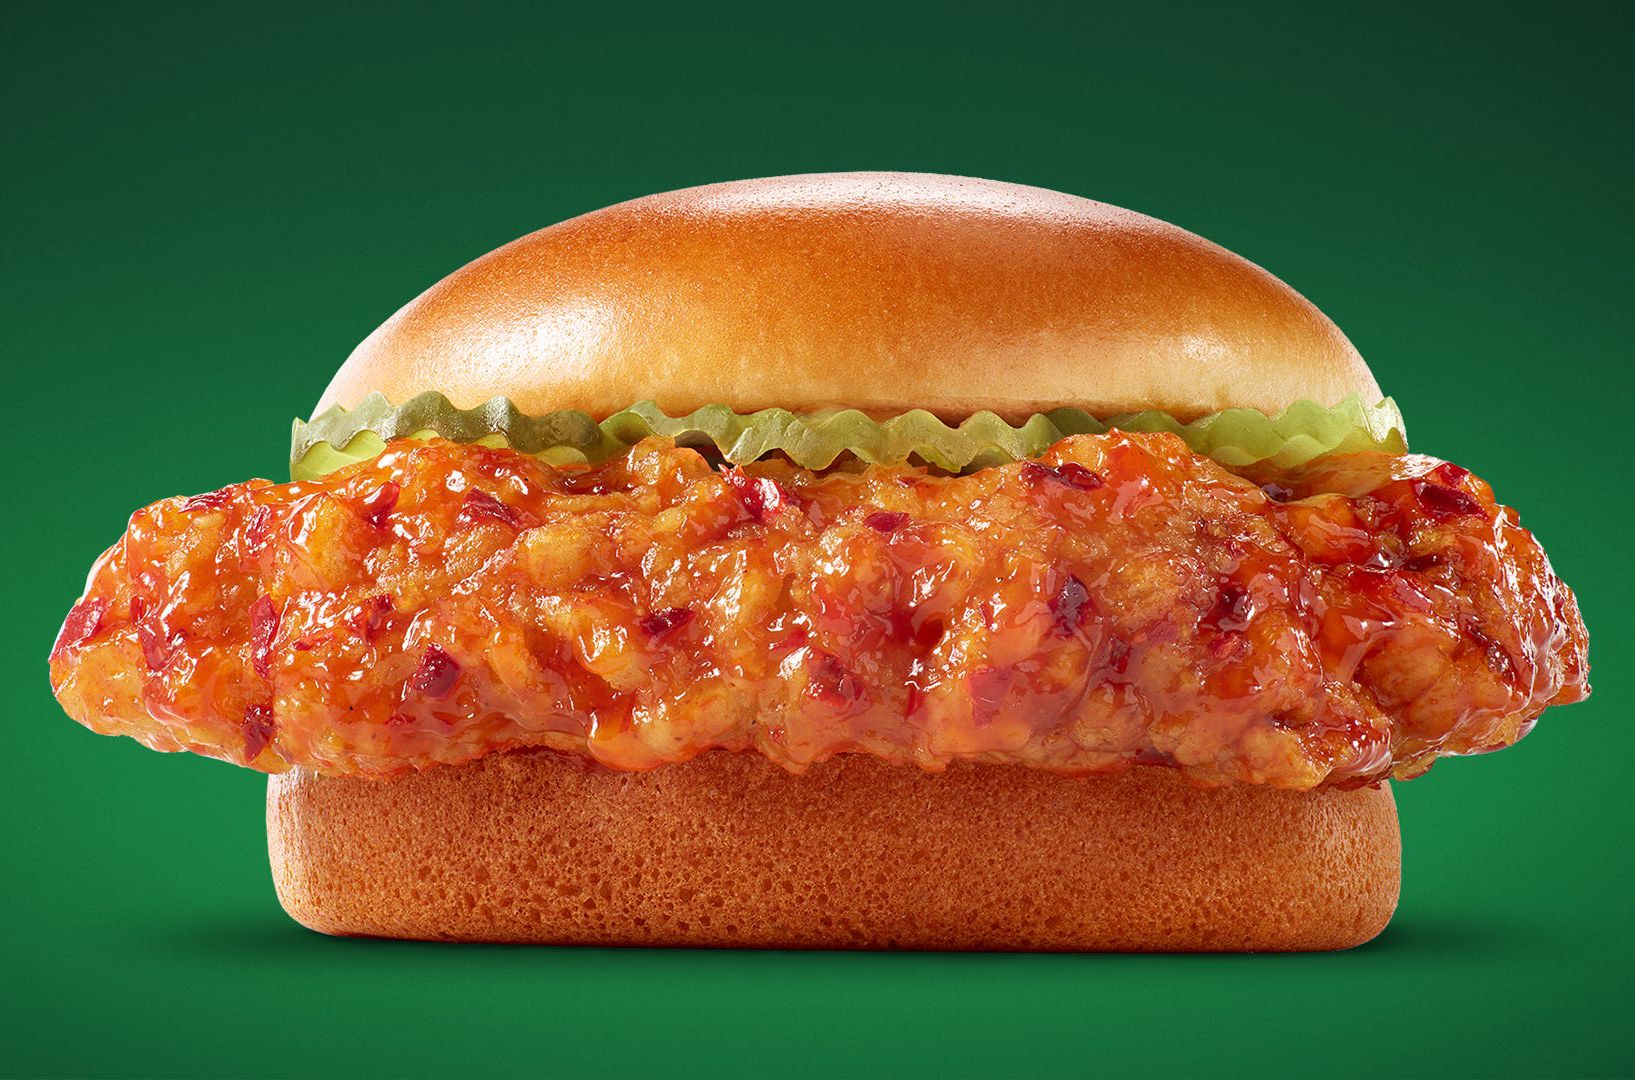 Wingstop Premiers their New Chicken Sandwiches Available in Your Choice of Wingstop’s 12 Unique Flavors 